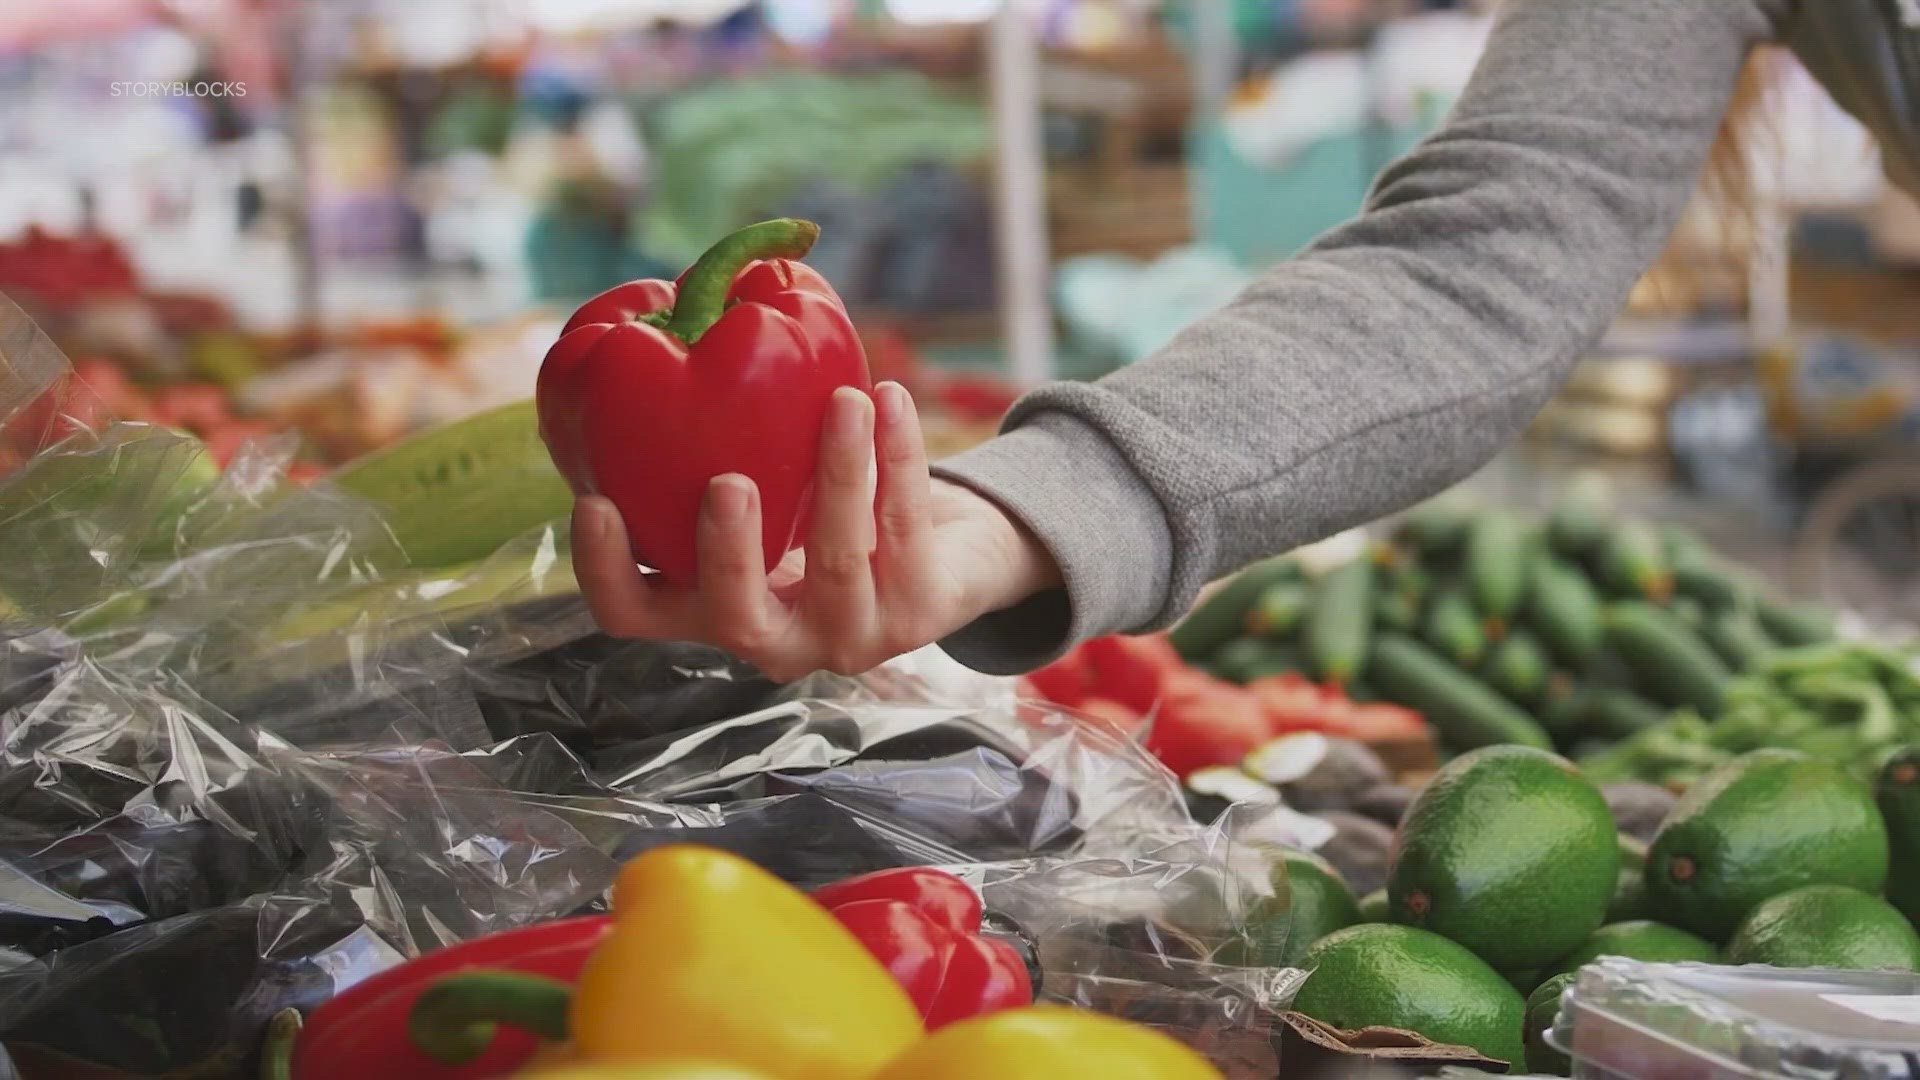 Eligible Missourians can get a $50 voucher for fresh produce at participating farmers markets. The vouchers can be used through the end of October.